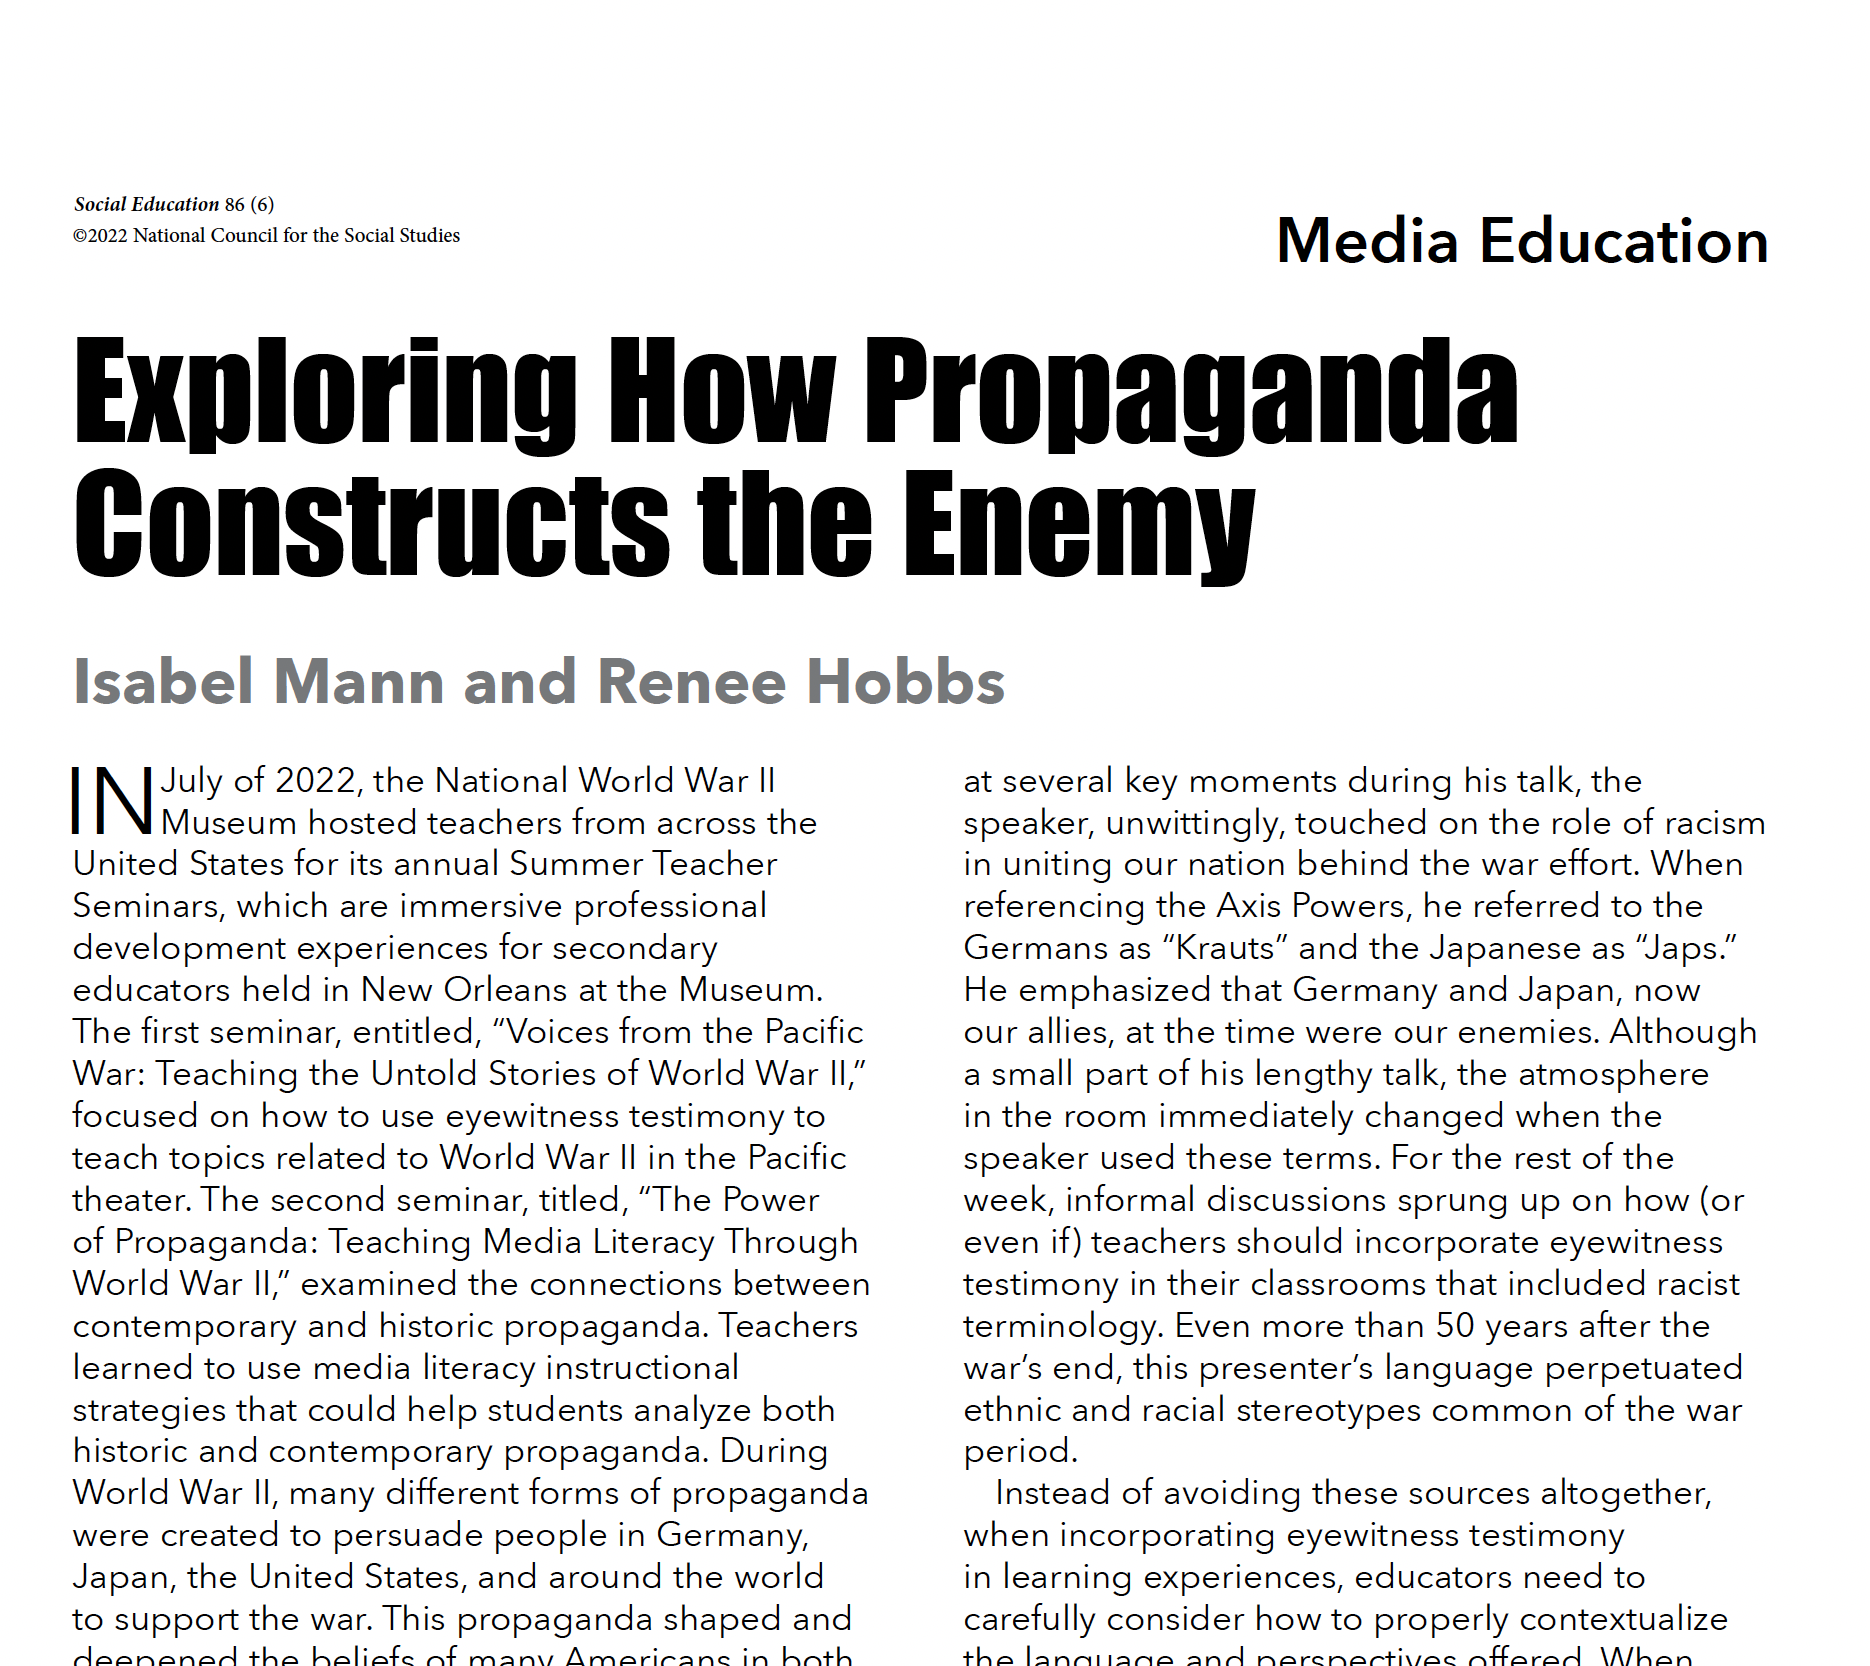 How Propaganda Constructs the Enemy